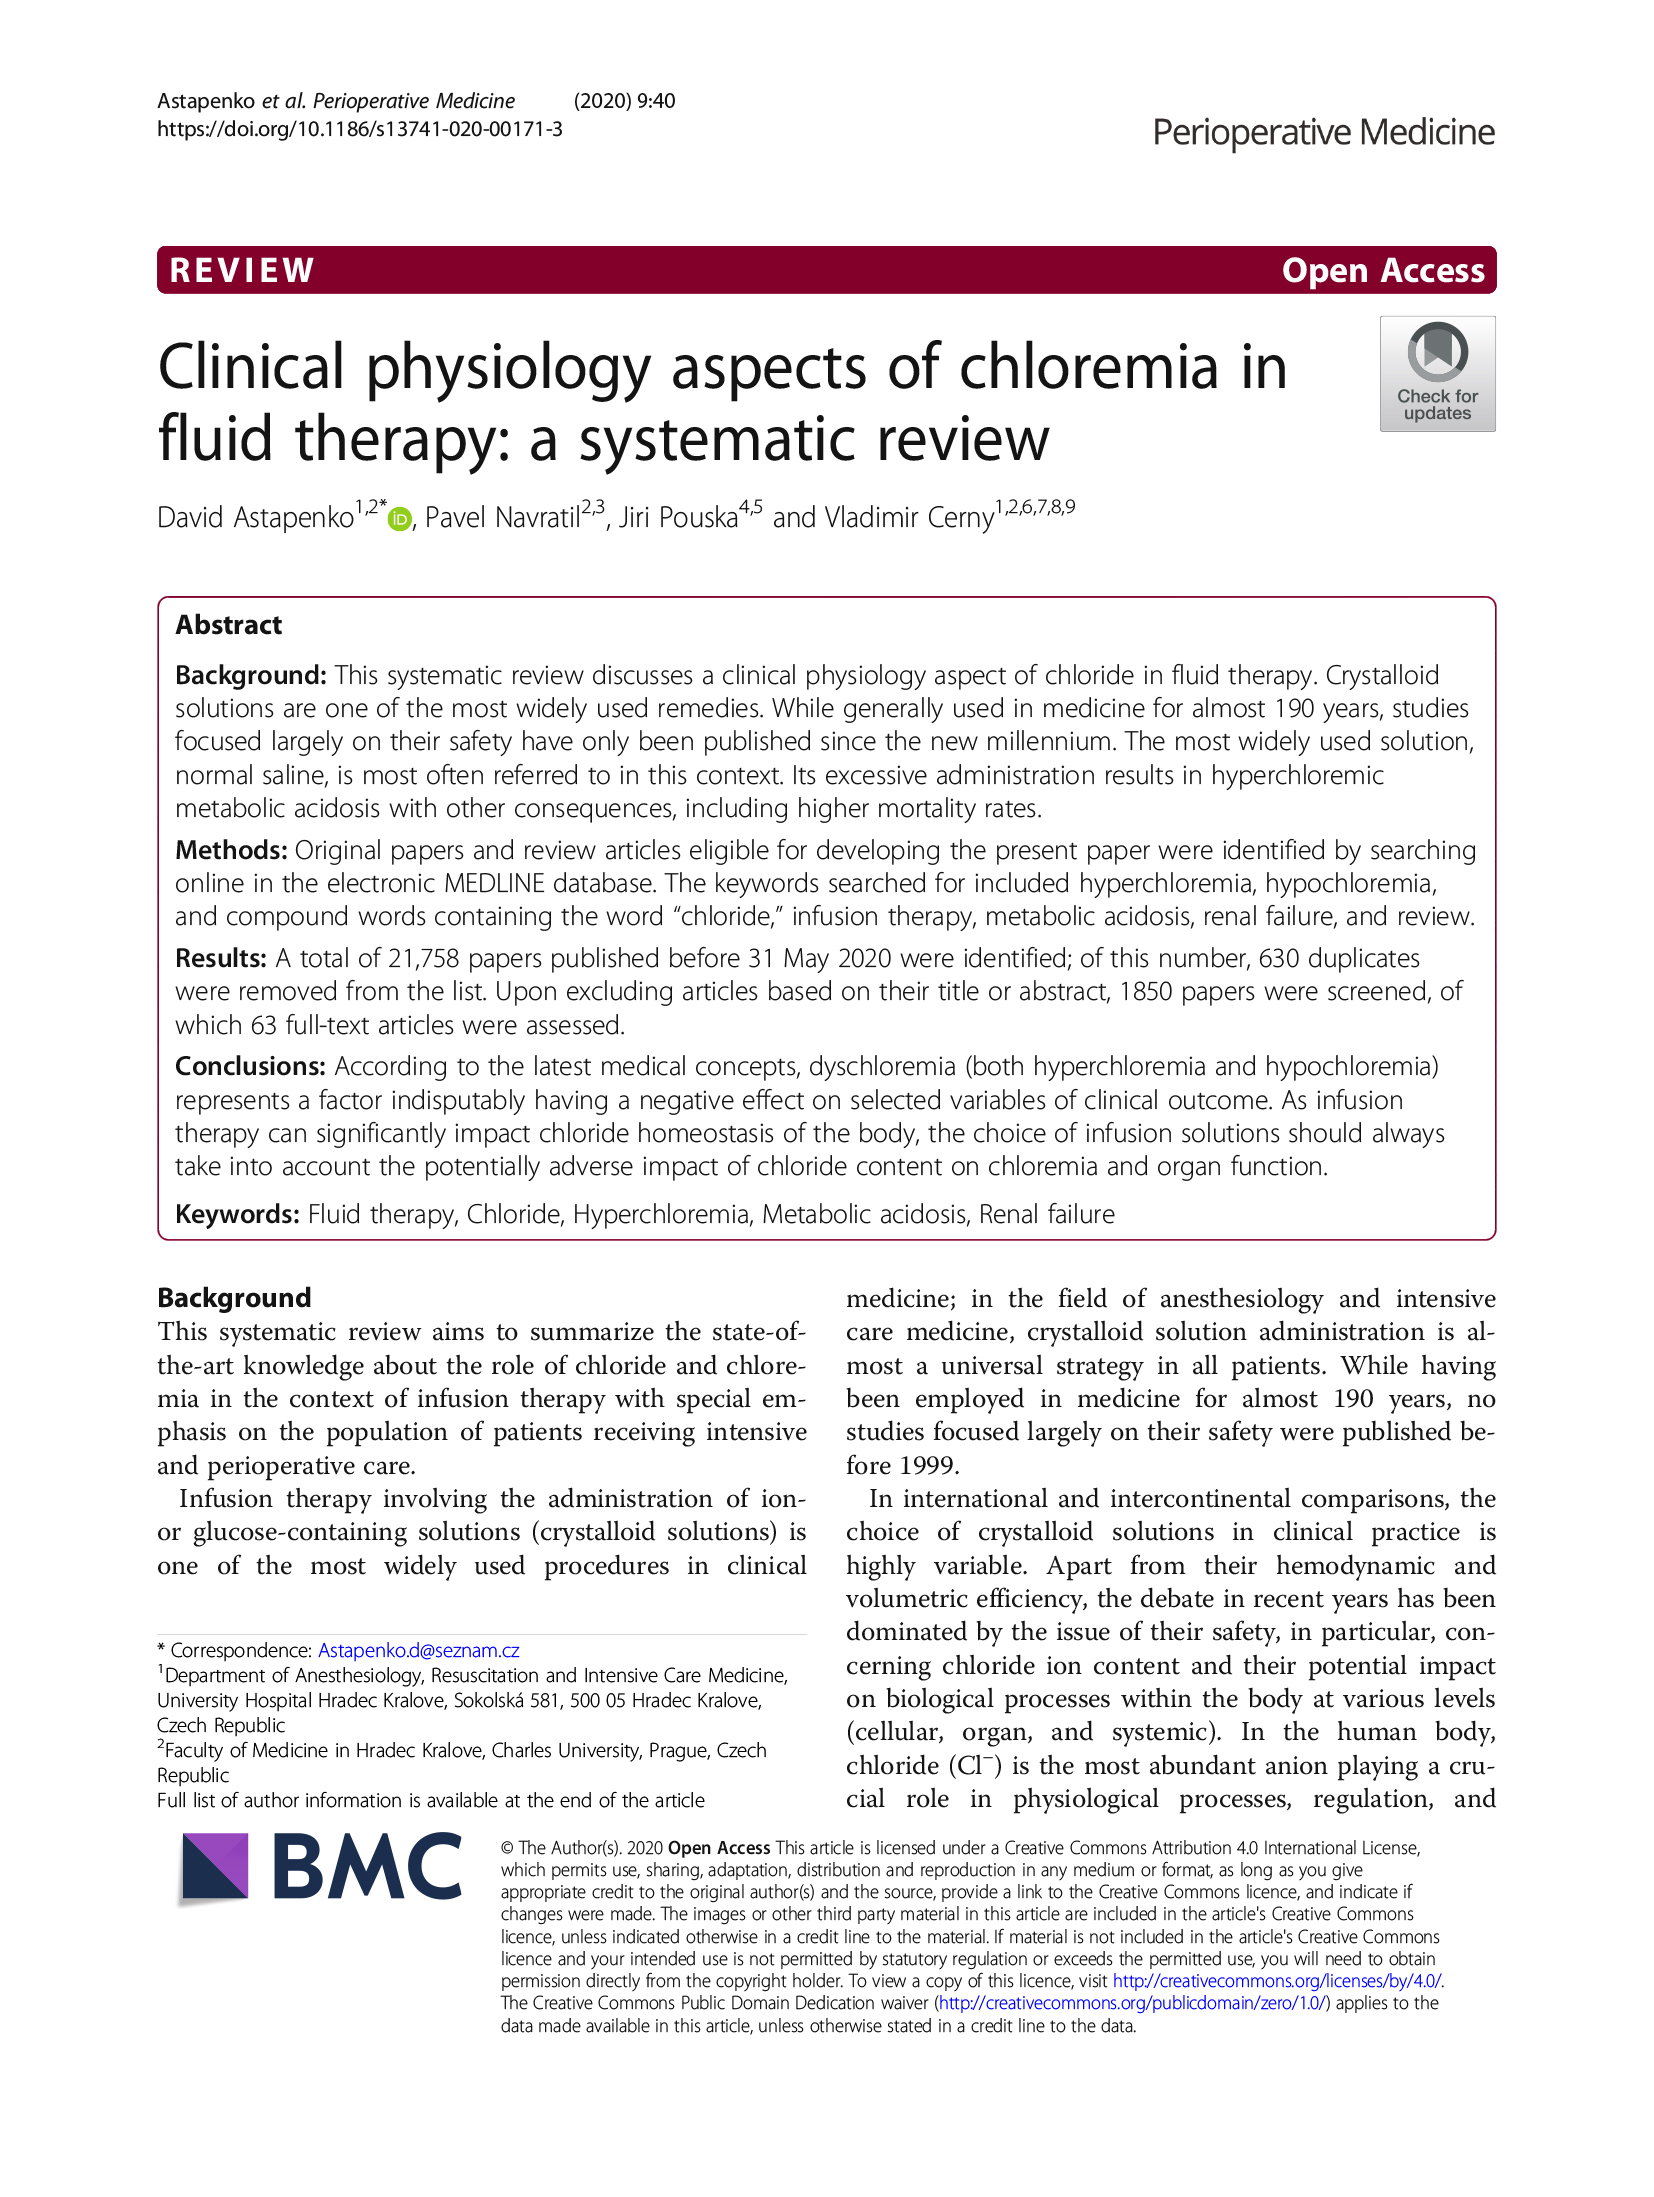 Clinical physiology aspects of chloremia in fluid therapy: a systematic review